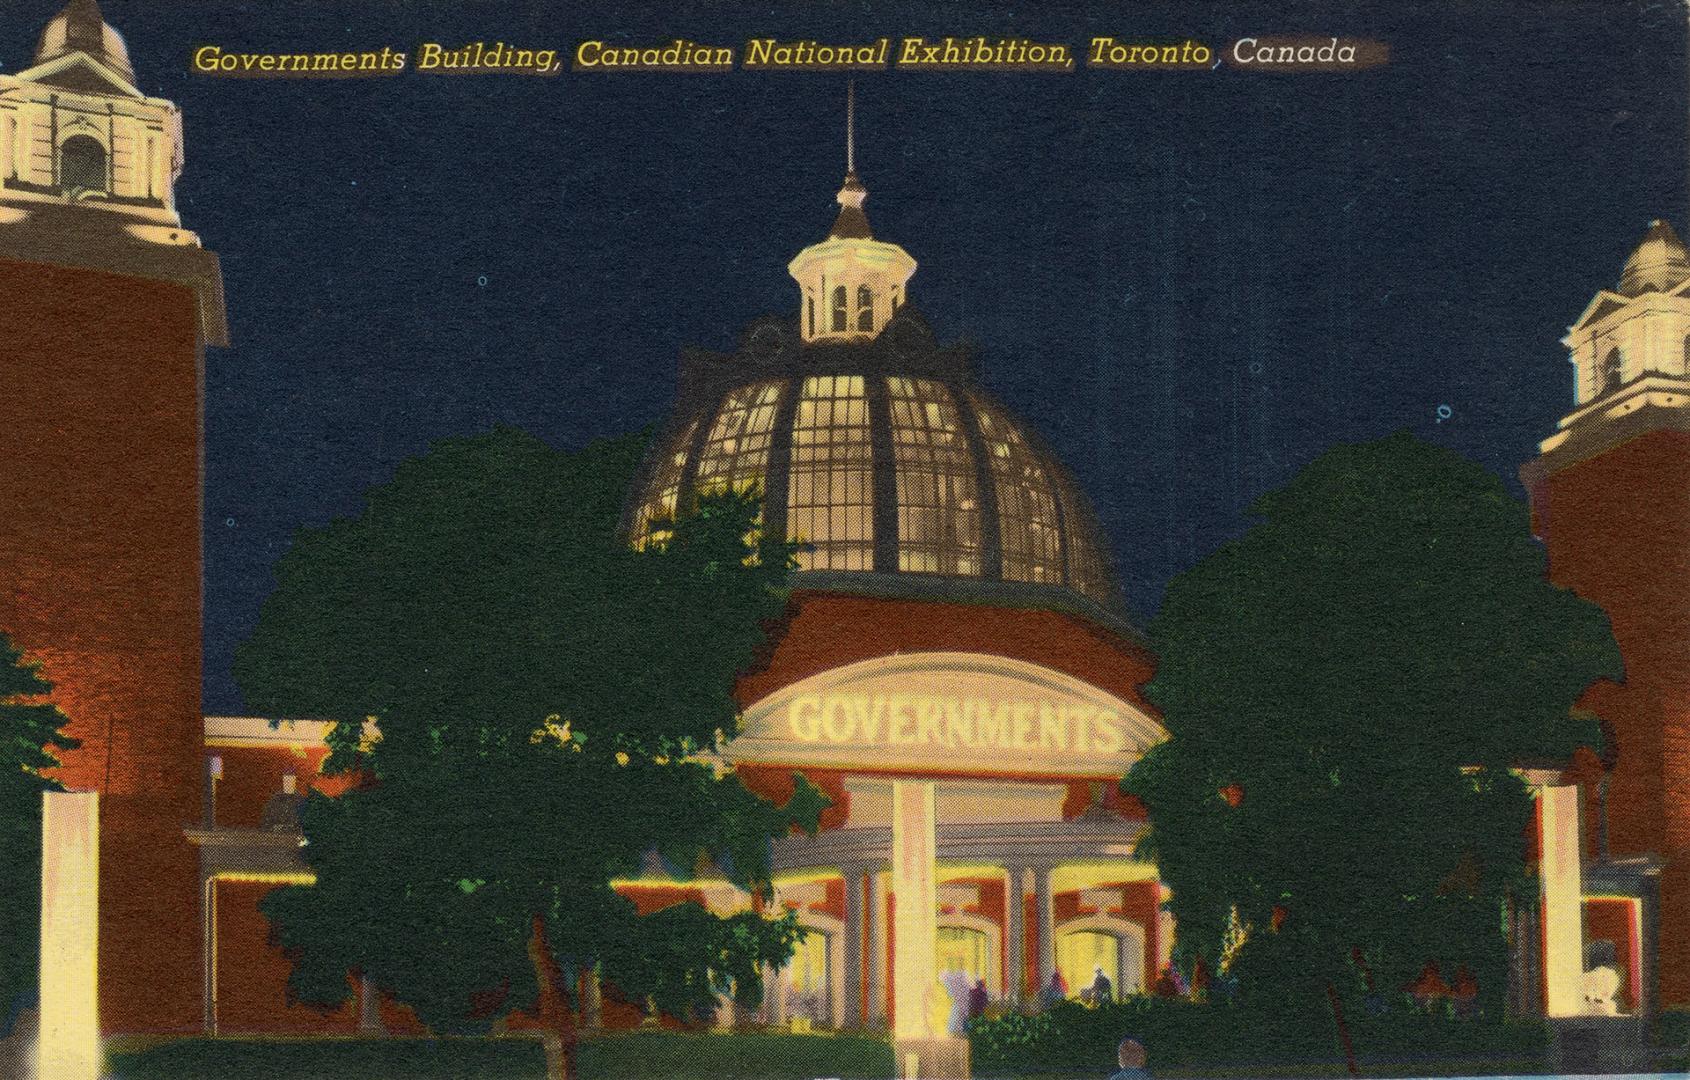 Colorized photograph of a domed arena at nighttime.